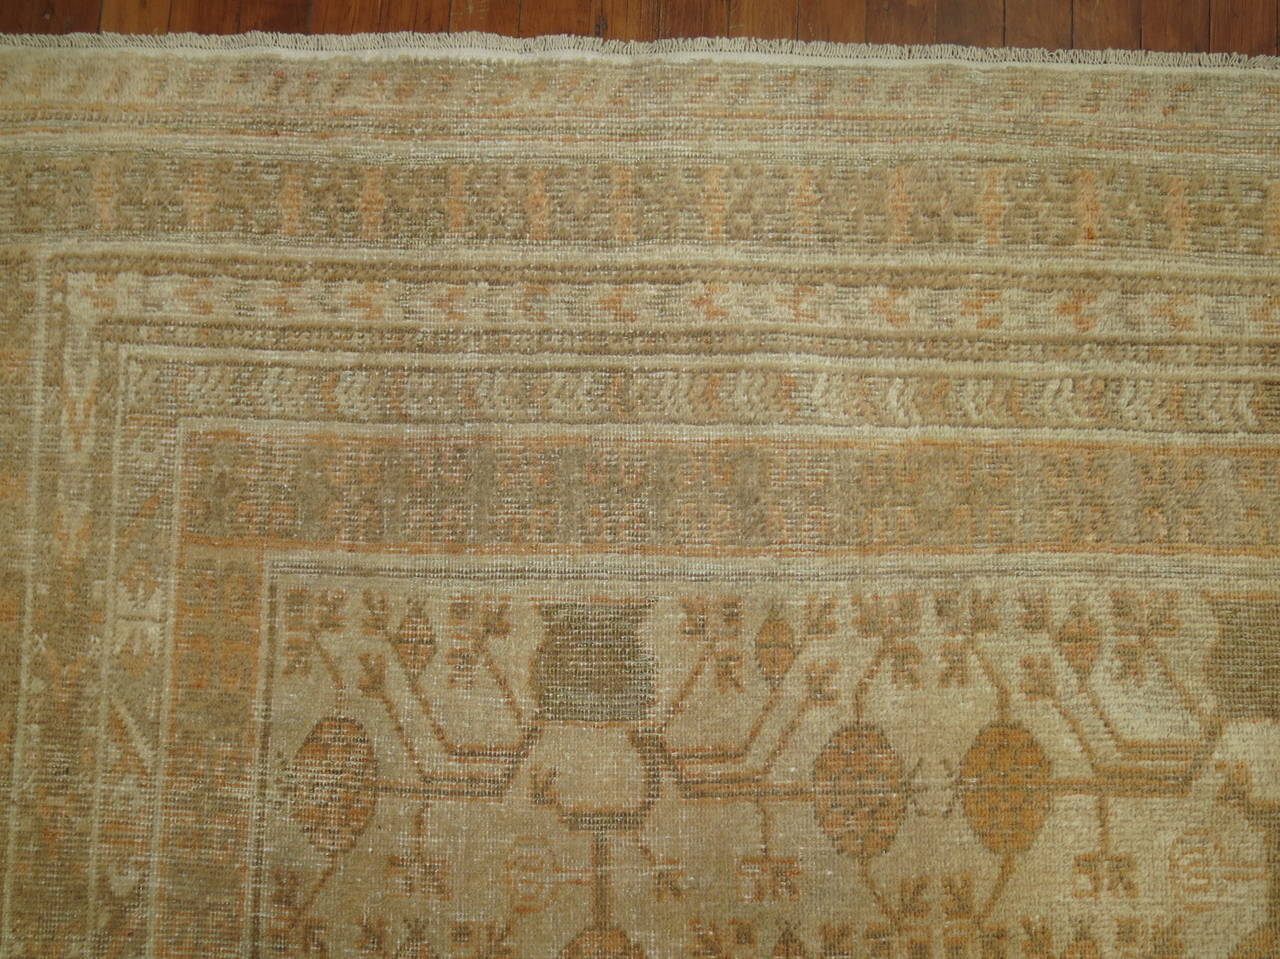 Pomegranate Motif Khotan Rug In Good Condition For Sale In New York, NY